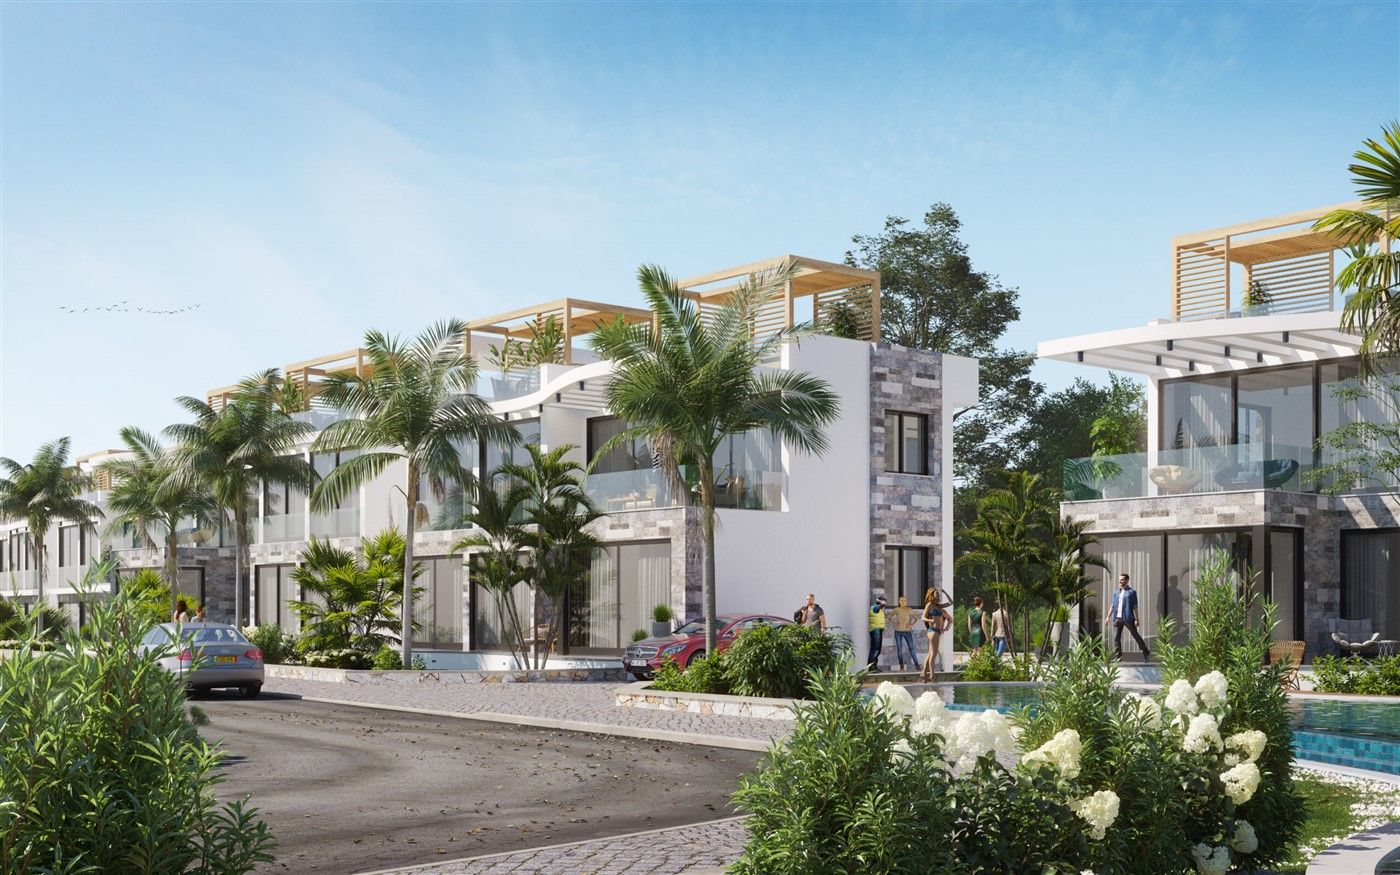 New luxury project by the sea - Northern Cyprus